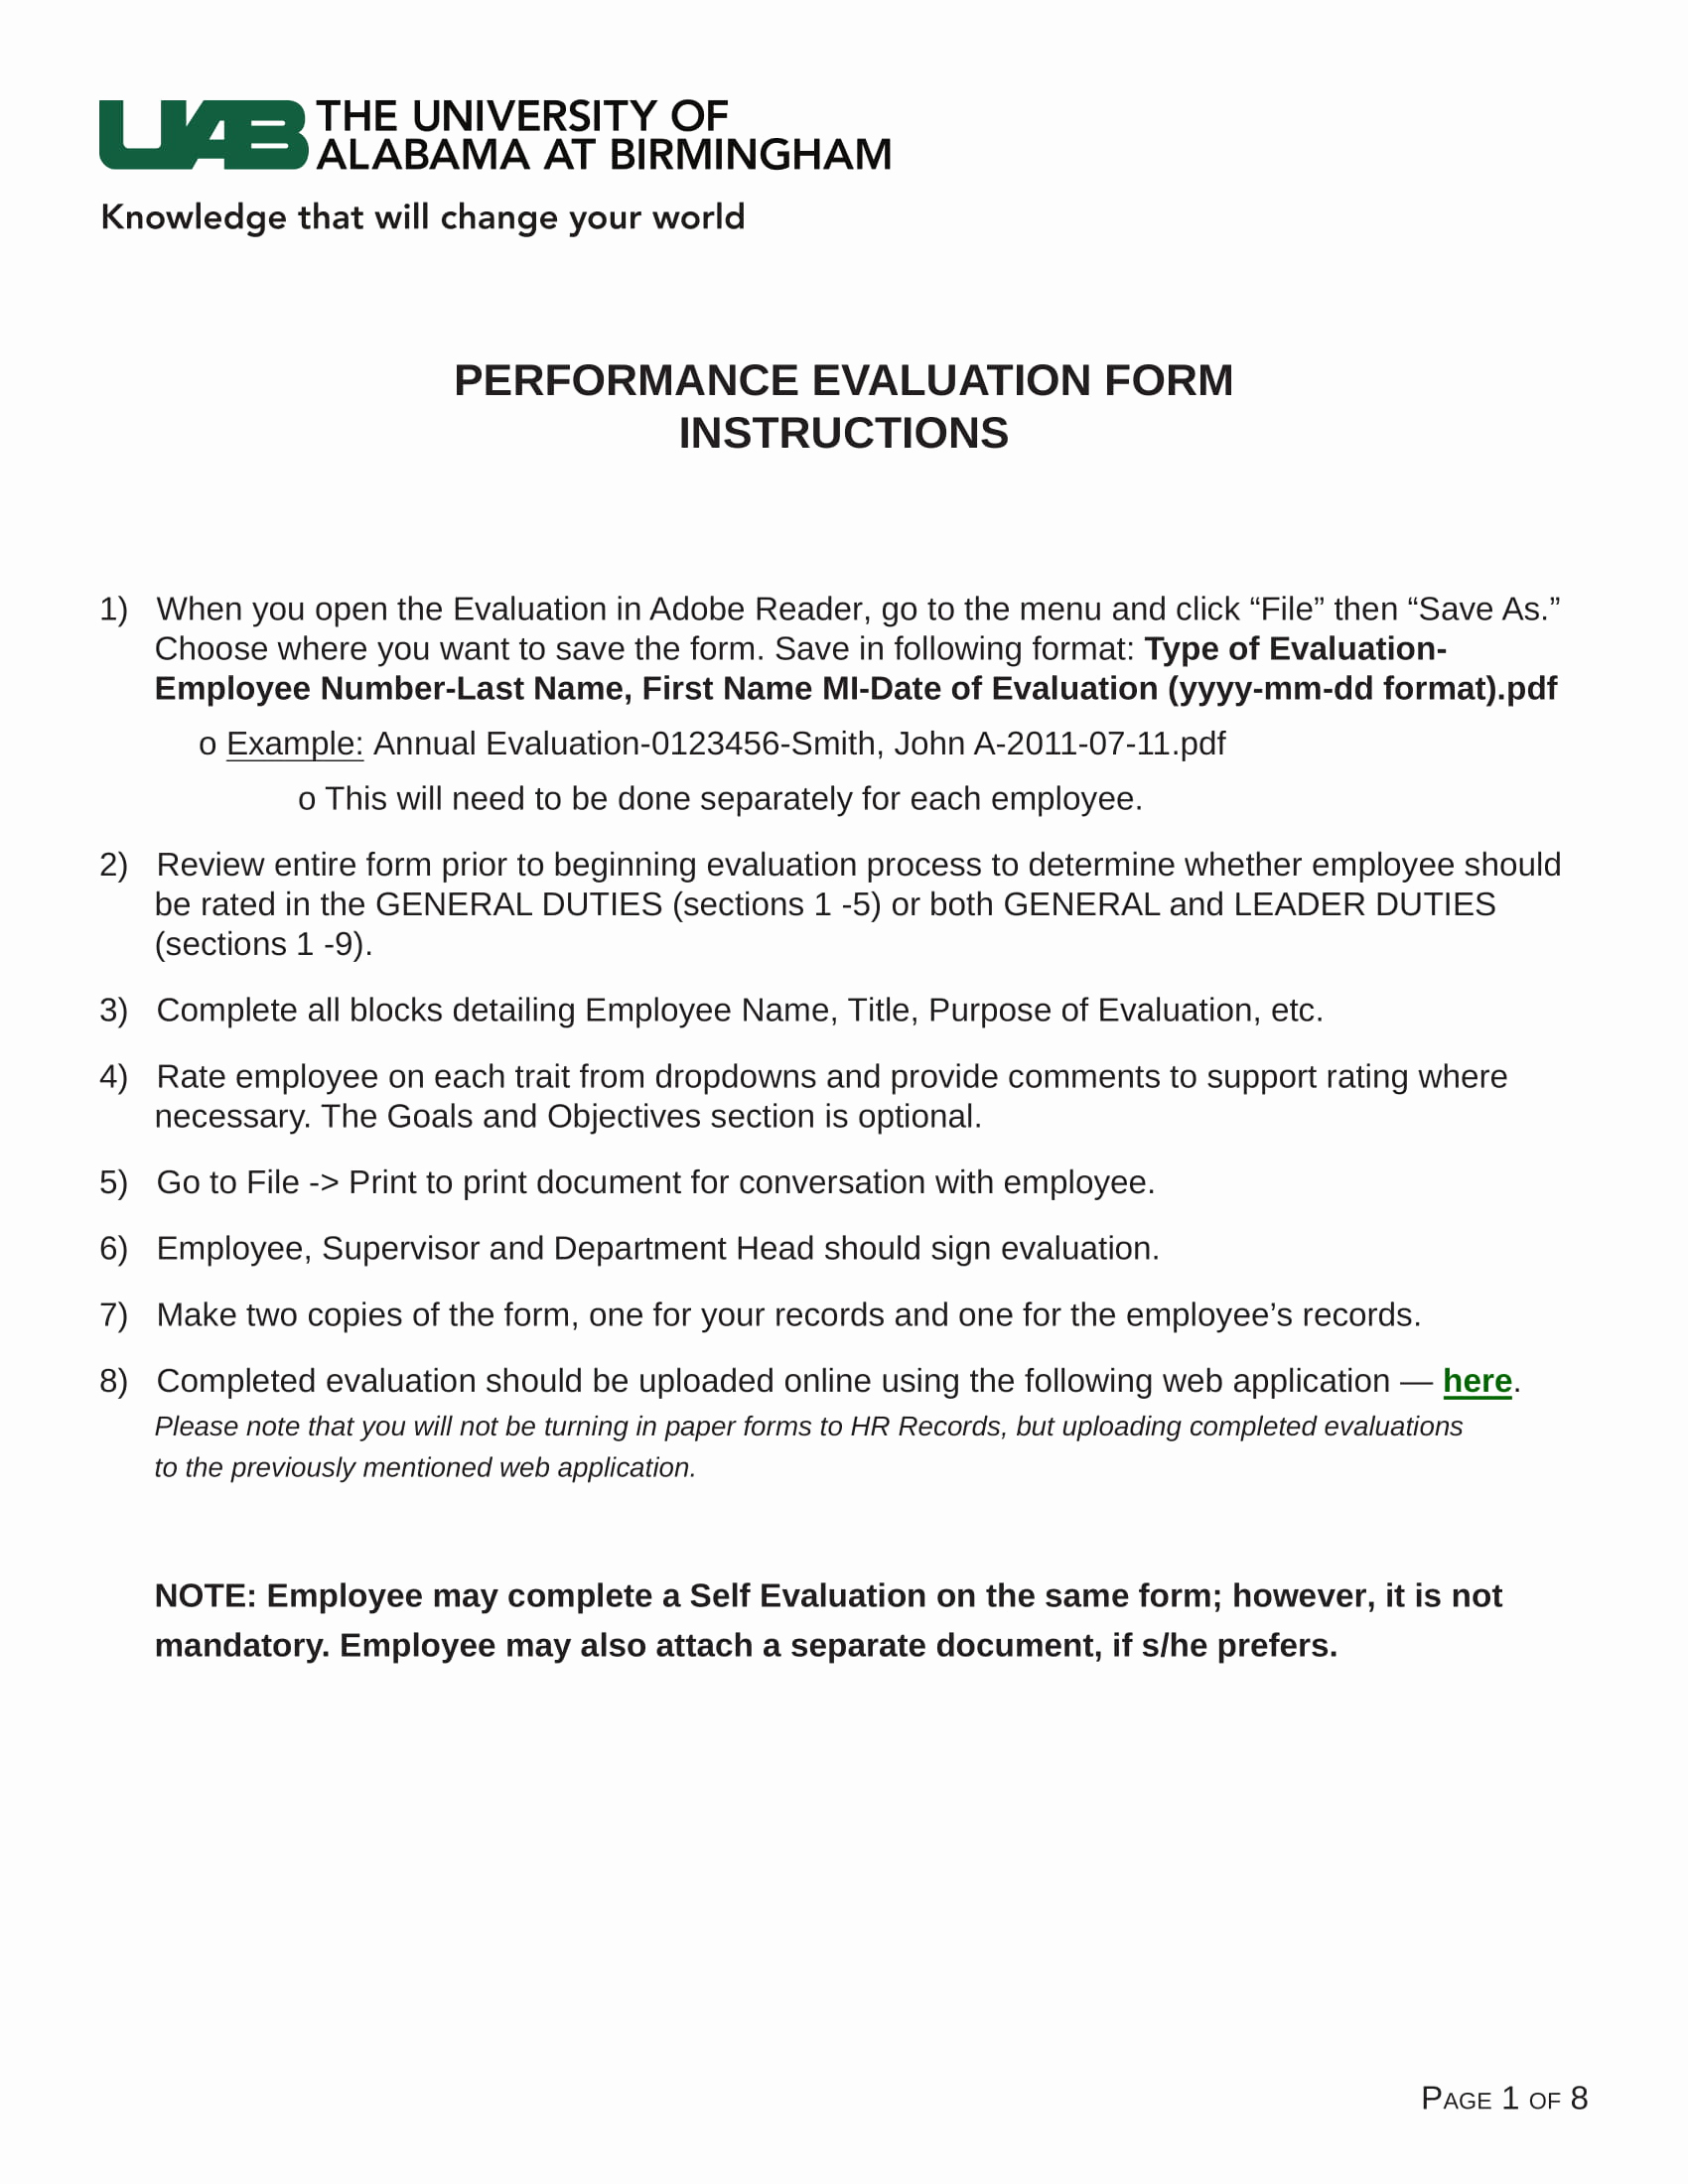 Employee Evaluation form Pdf Luxury 9 Performance Review form Examples Pdf